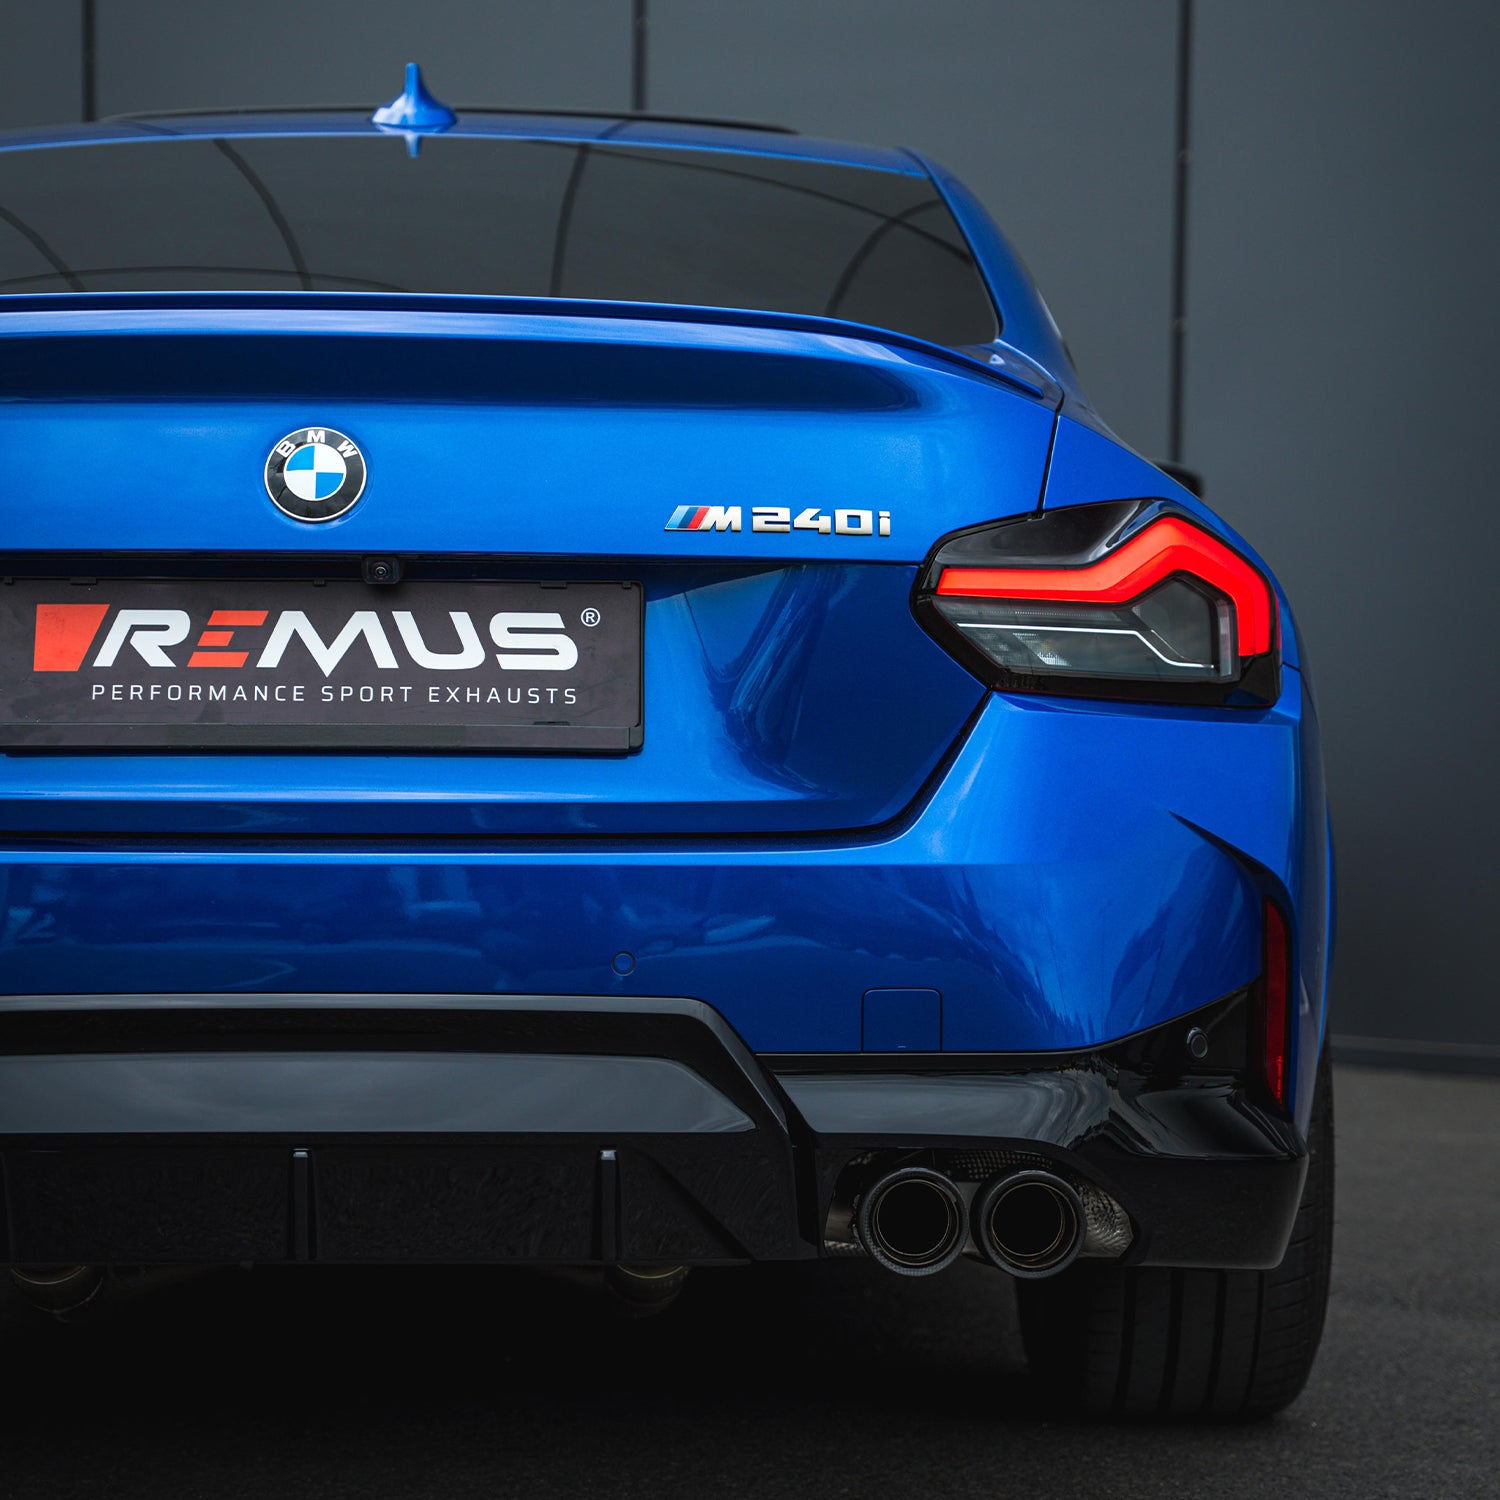 Remus Exhausts BMW G42 M240i RACING Axle Back Exhaust System Fitted On Car